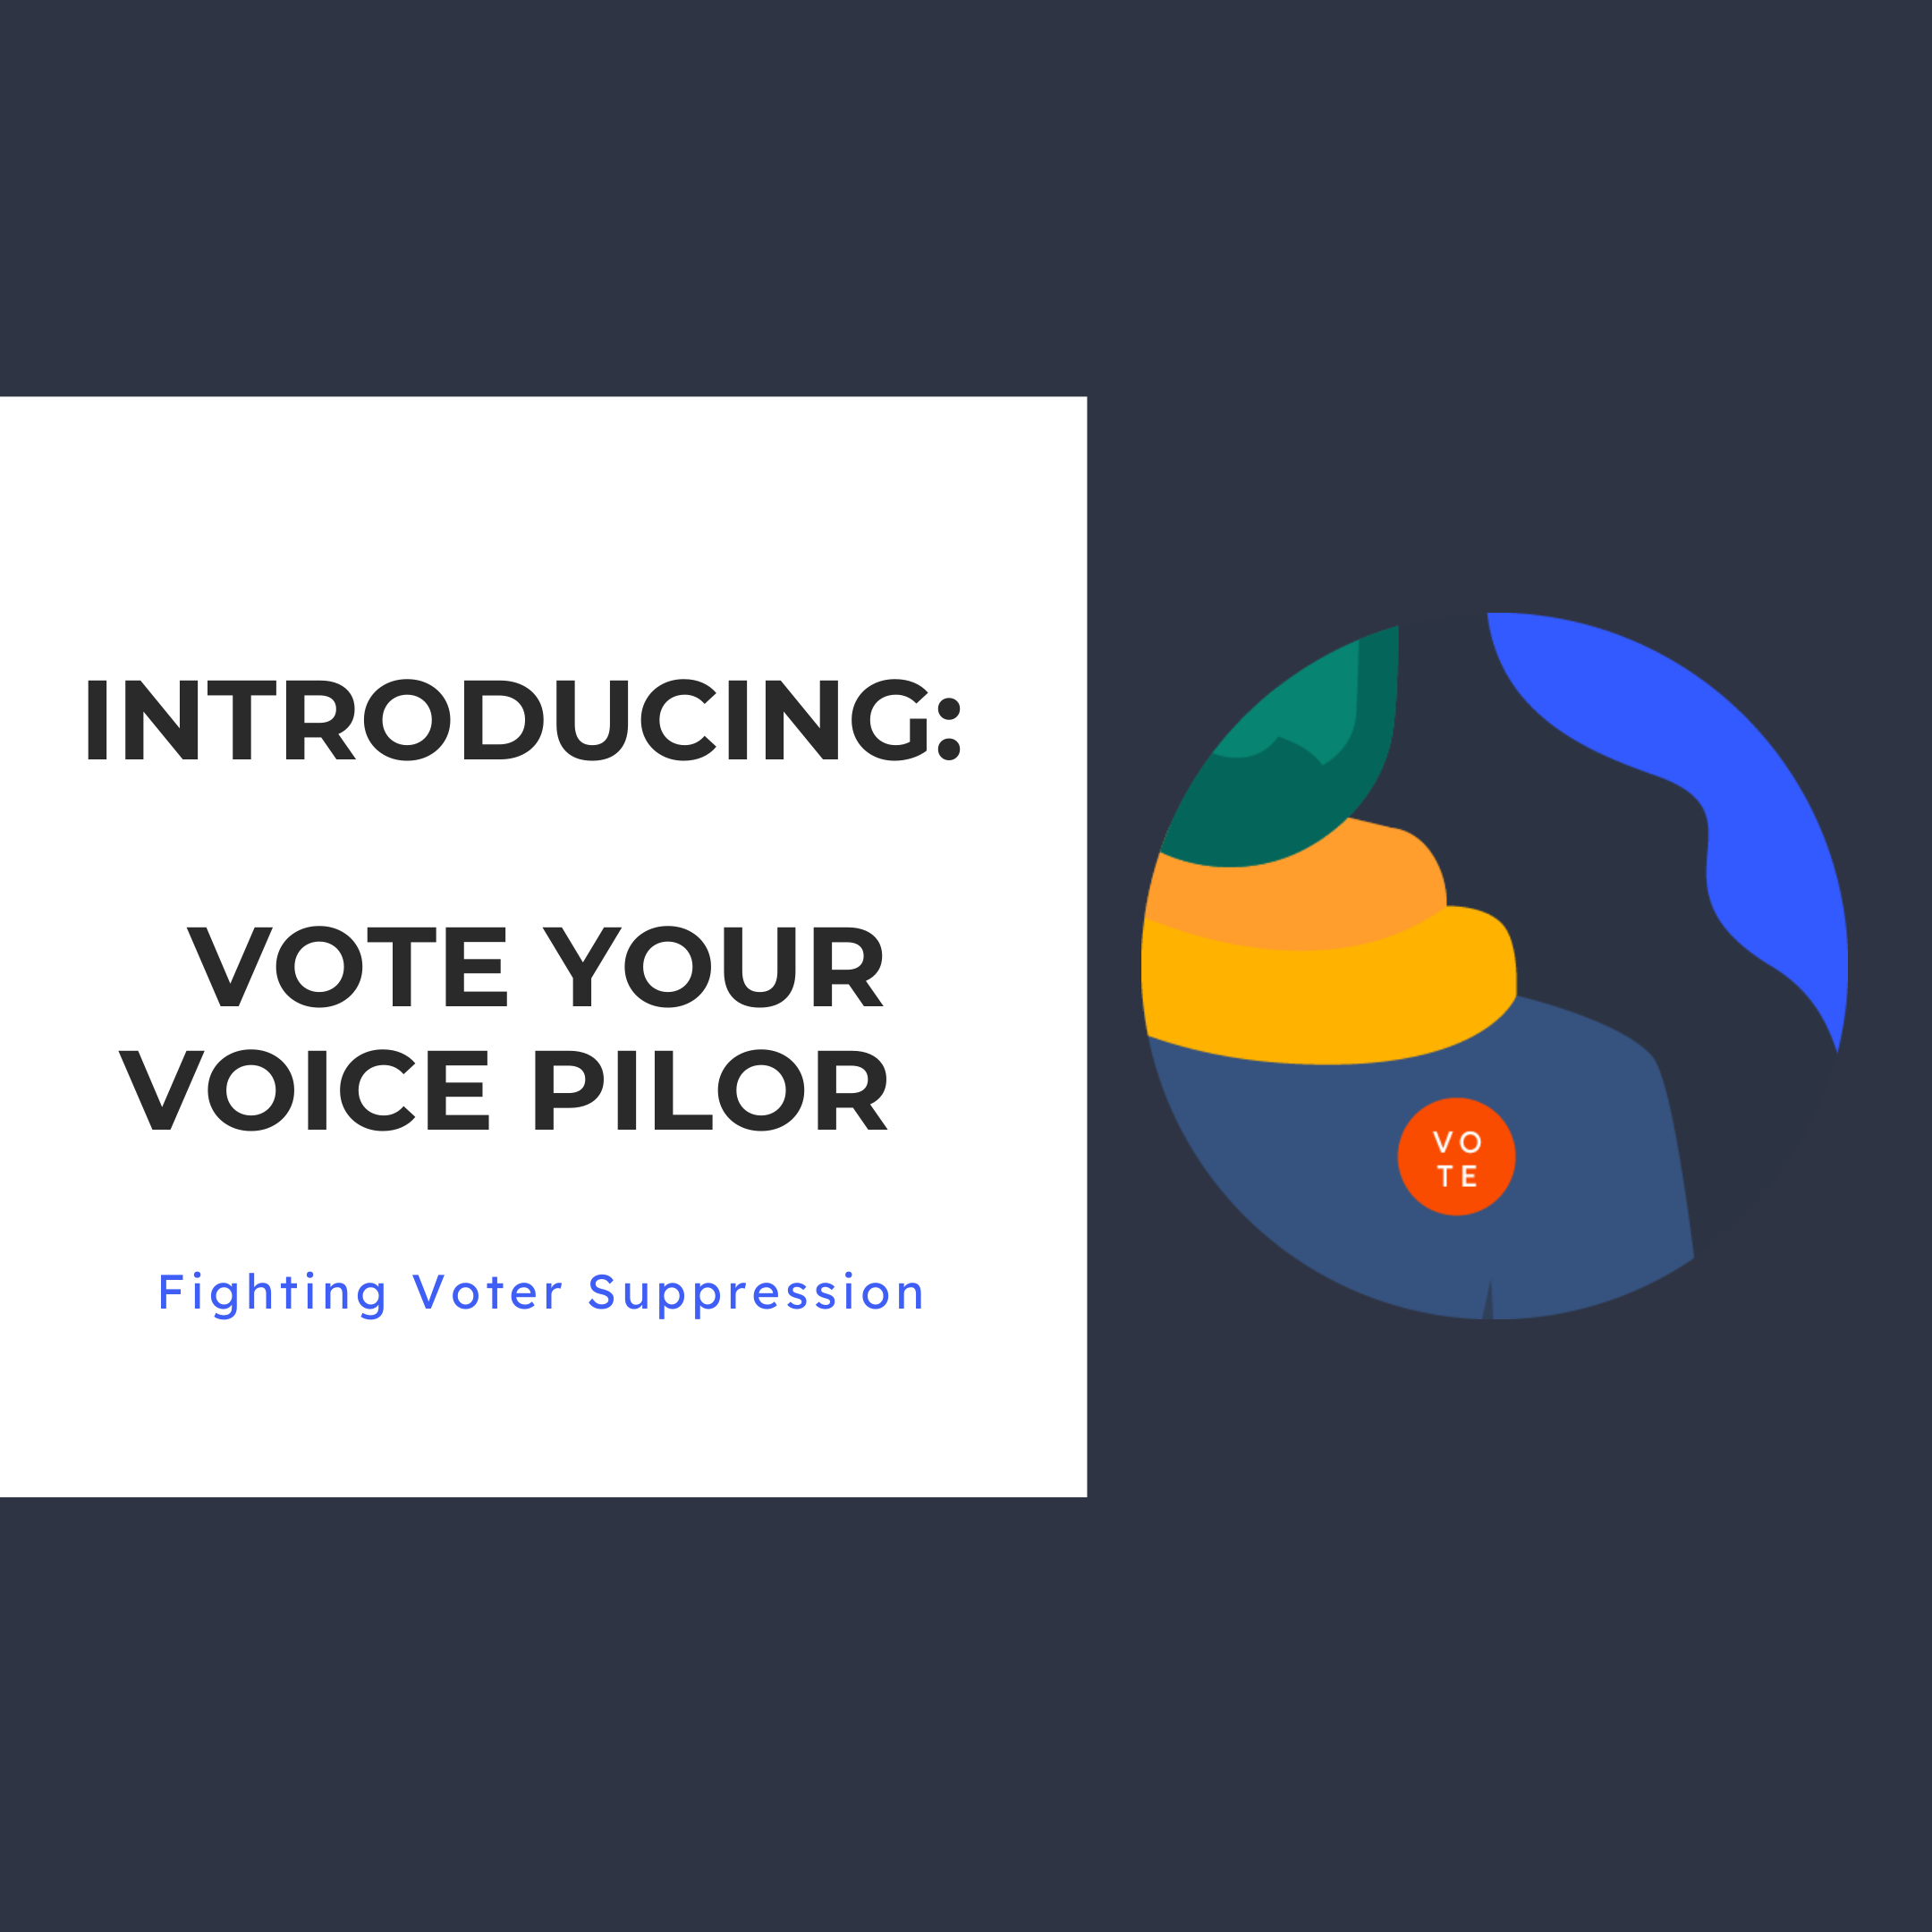 Introducing the Vote Your Voice Pilot Project with SPLC